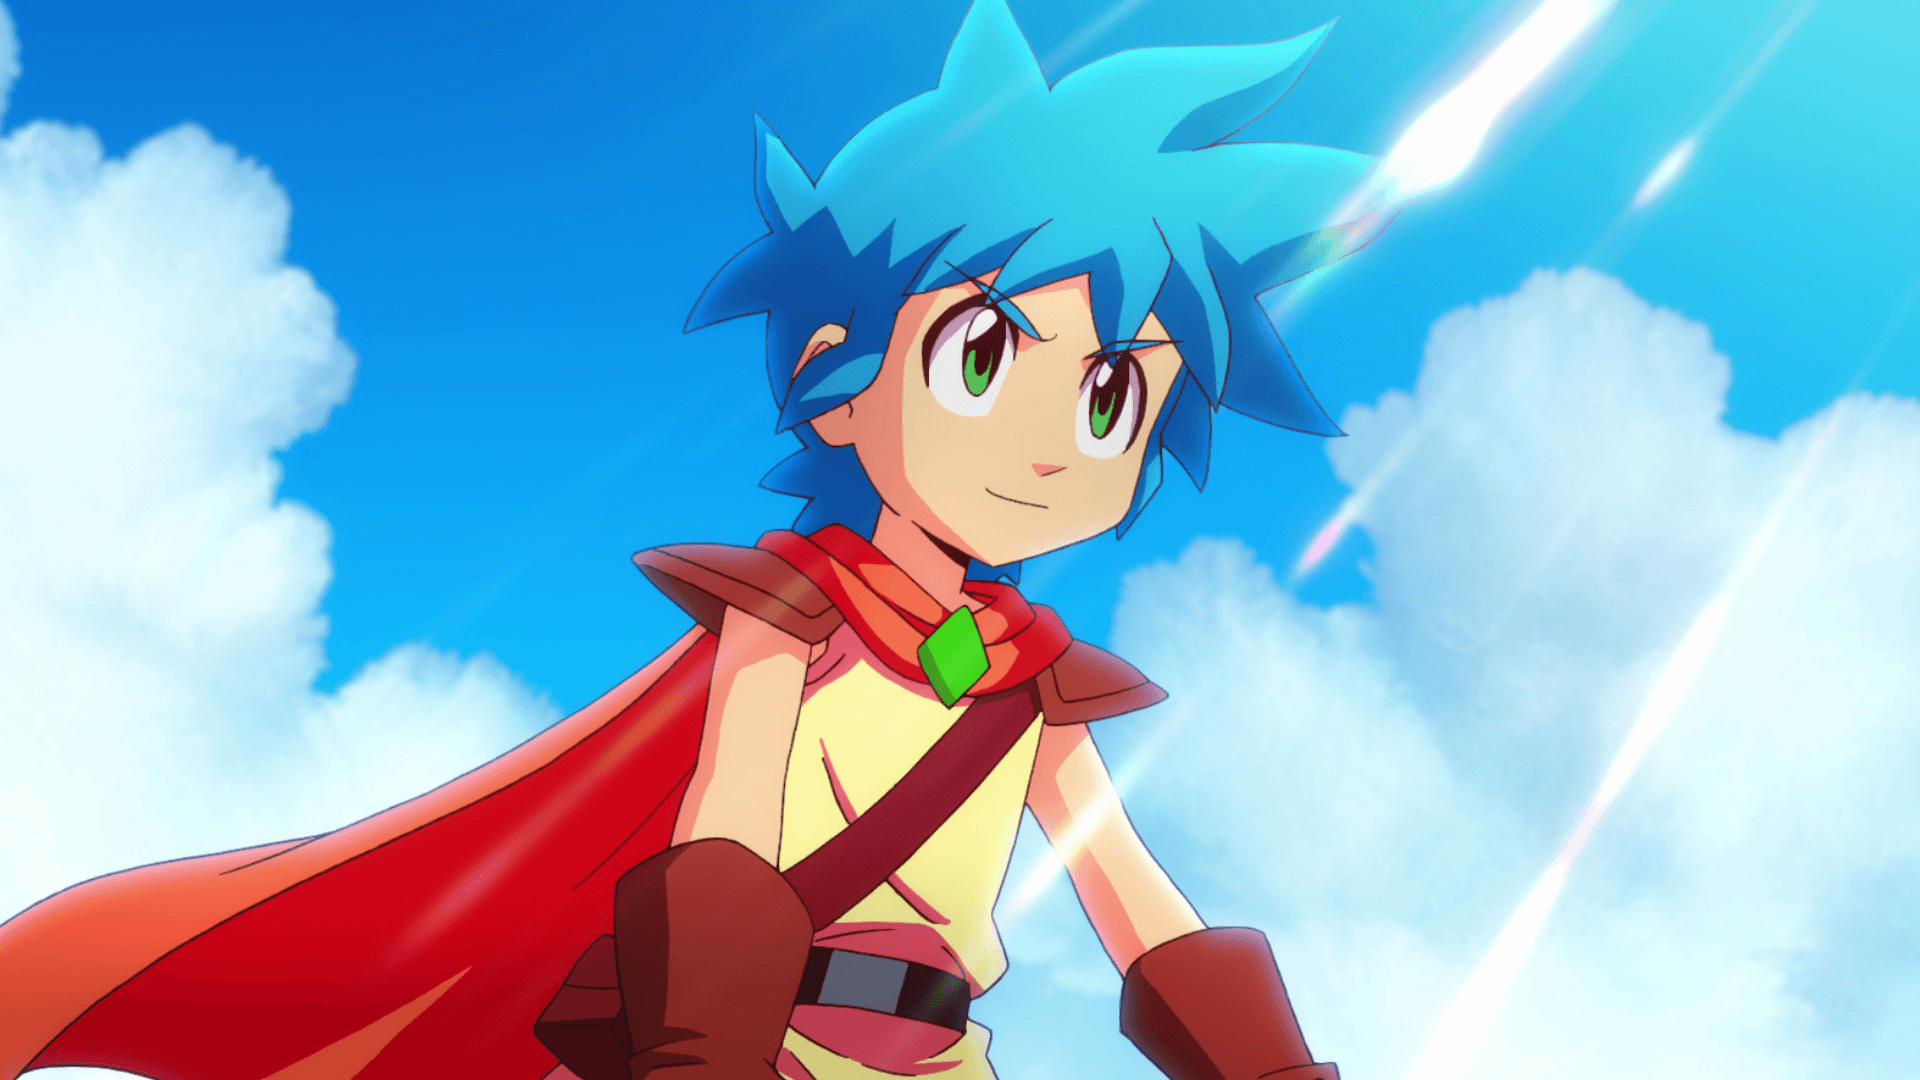 Monster Boy and the Cursed Kingdom Wallpaper. Read games reviews